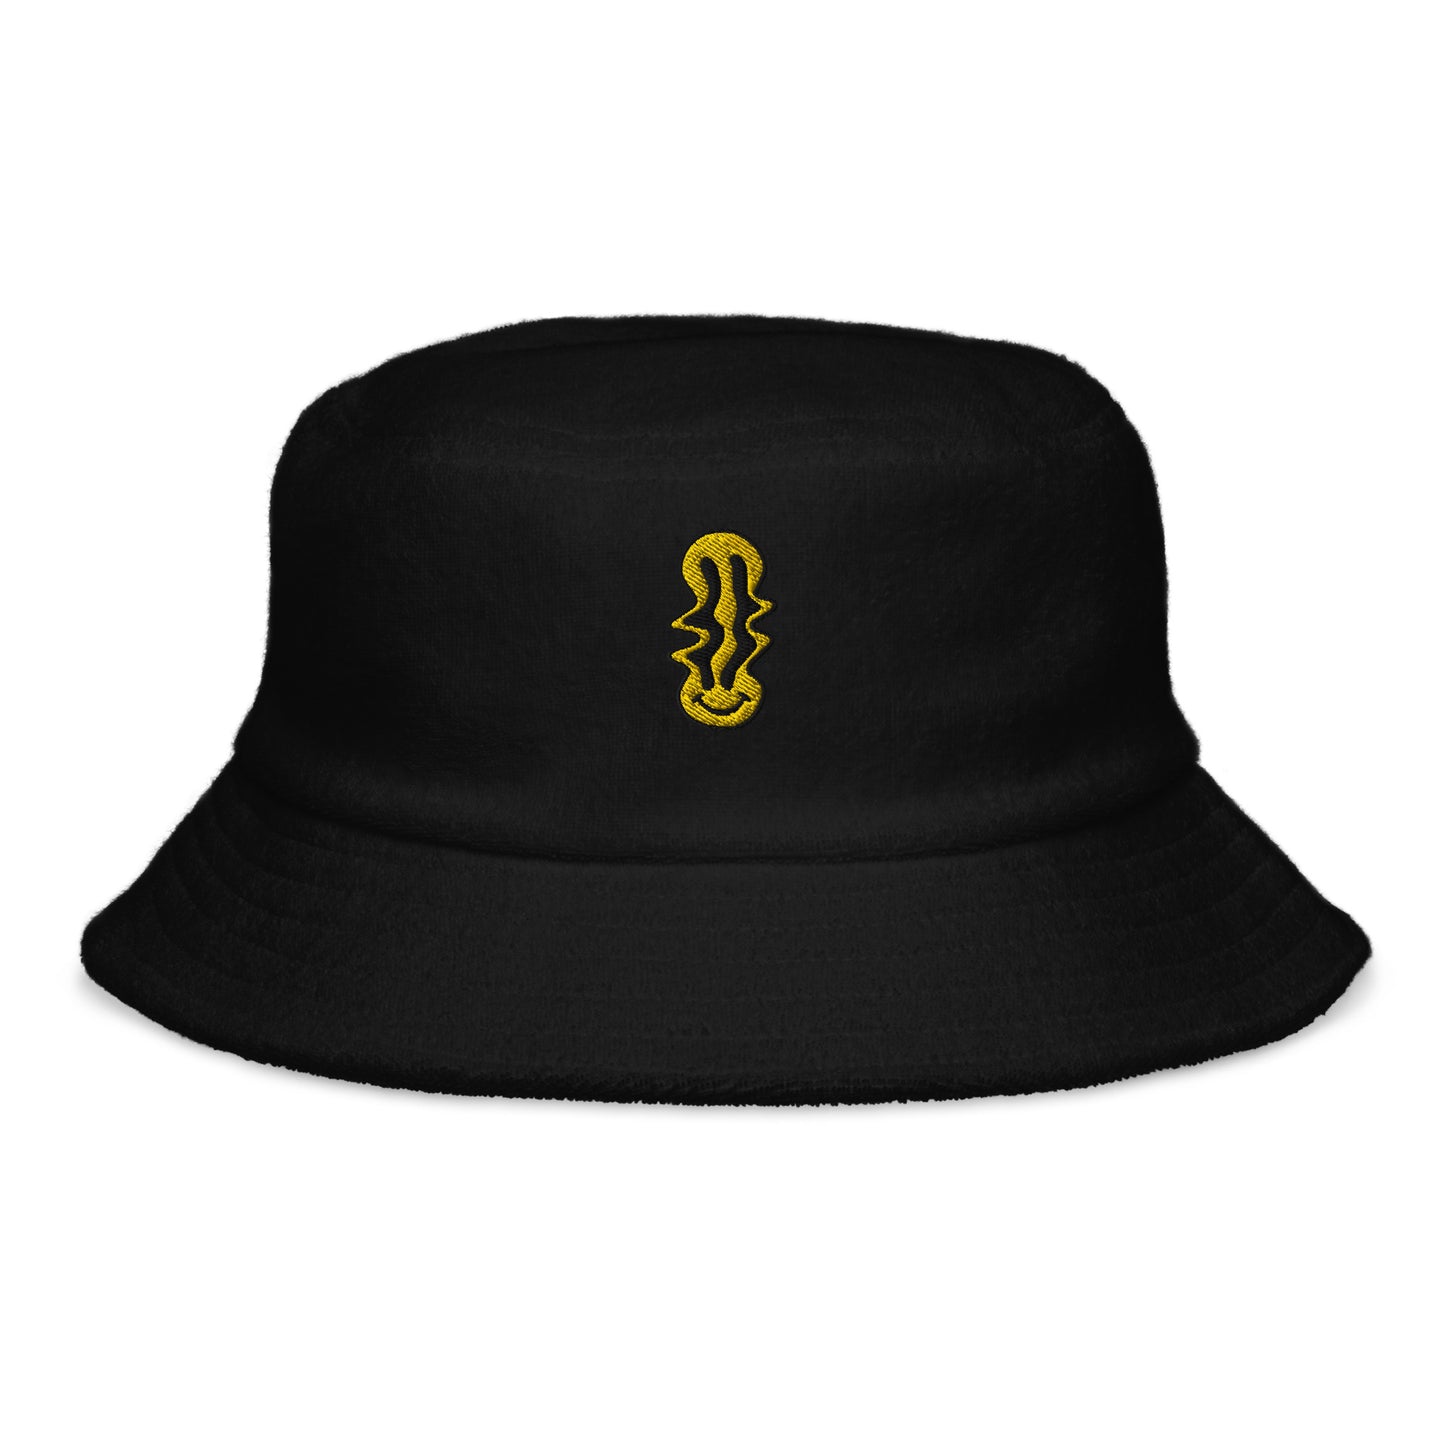 "Droopy" Unstructured terry cloth bucket hat